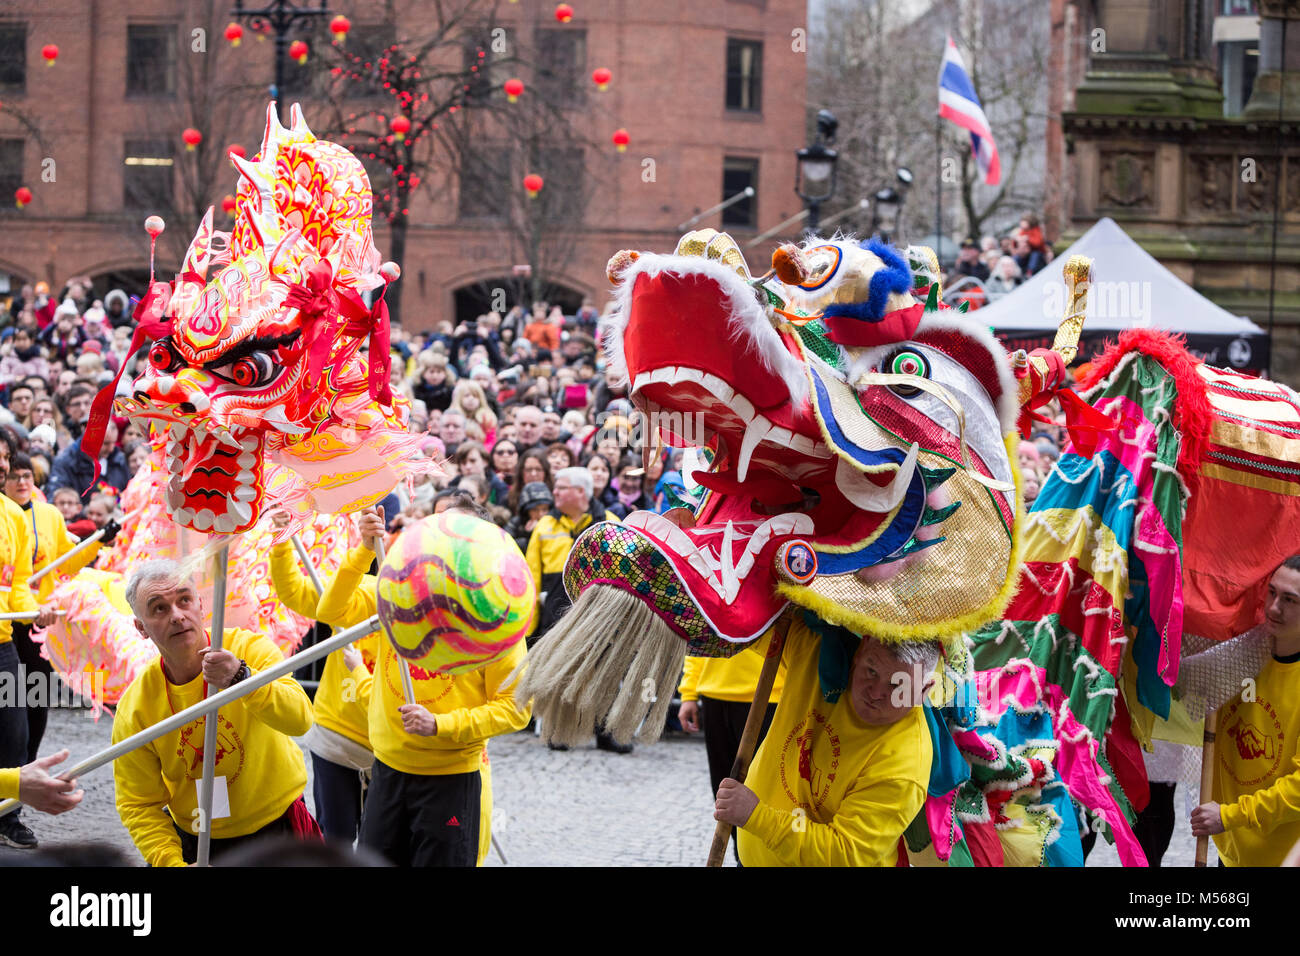 Chinese New Year 2018 celebrations in Manchester - The Year of the Dog. Stock Photo